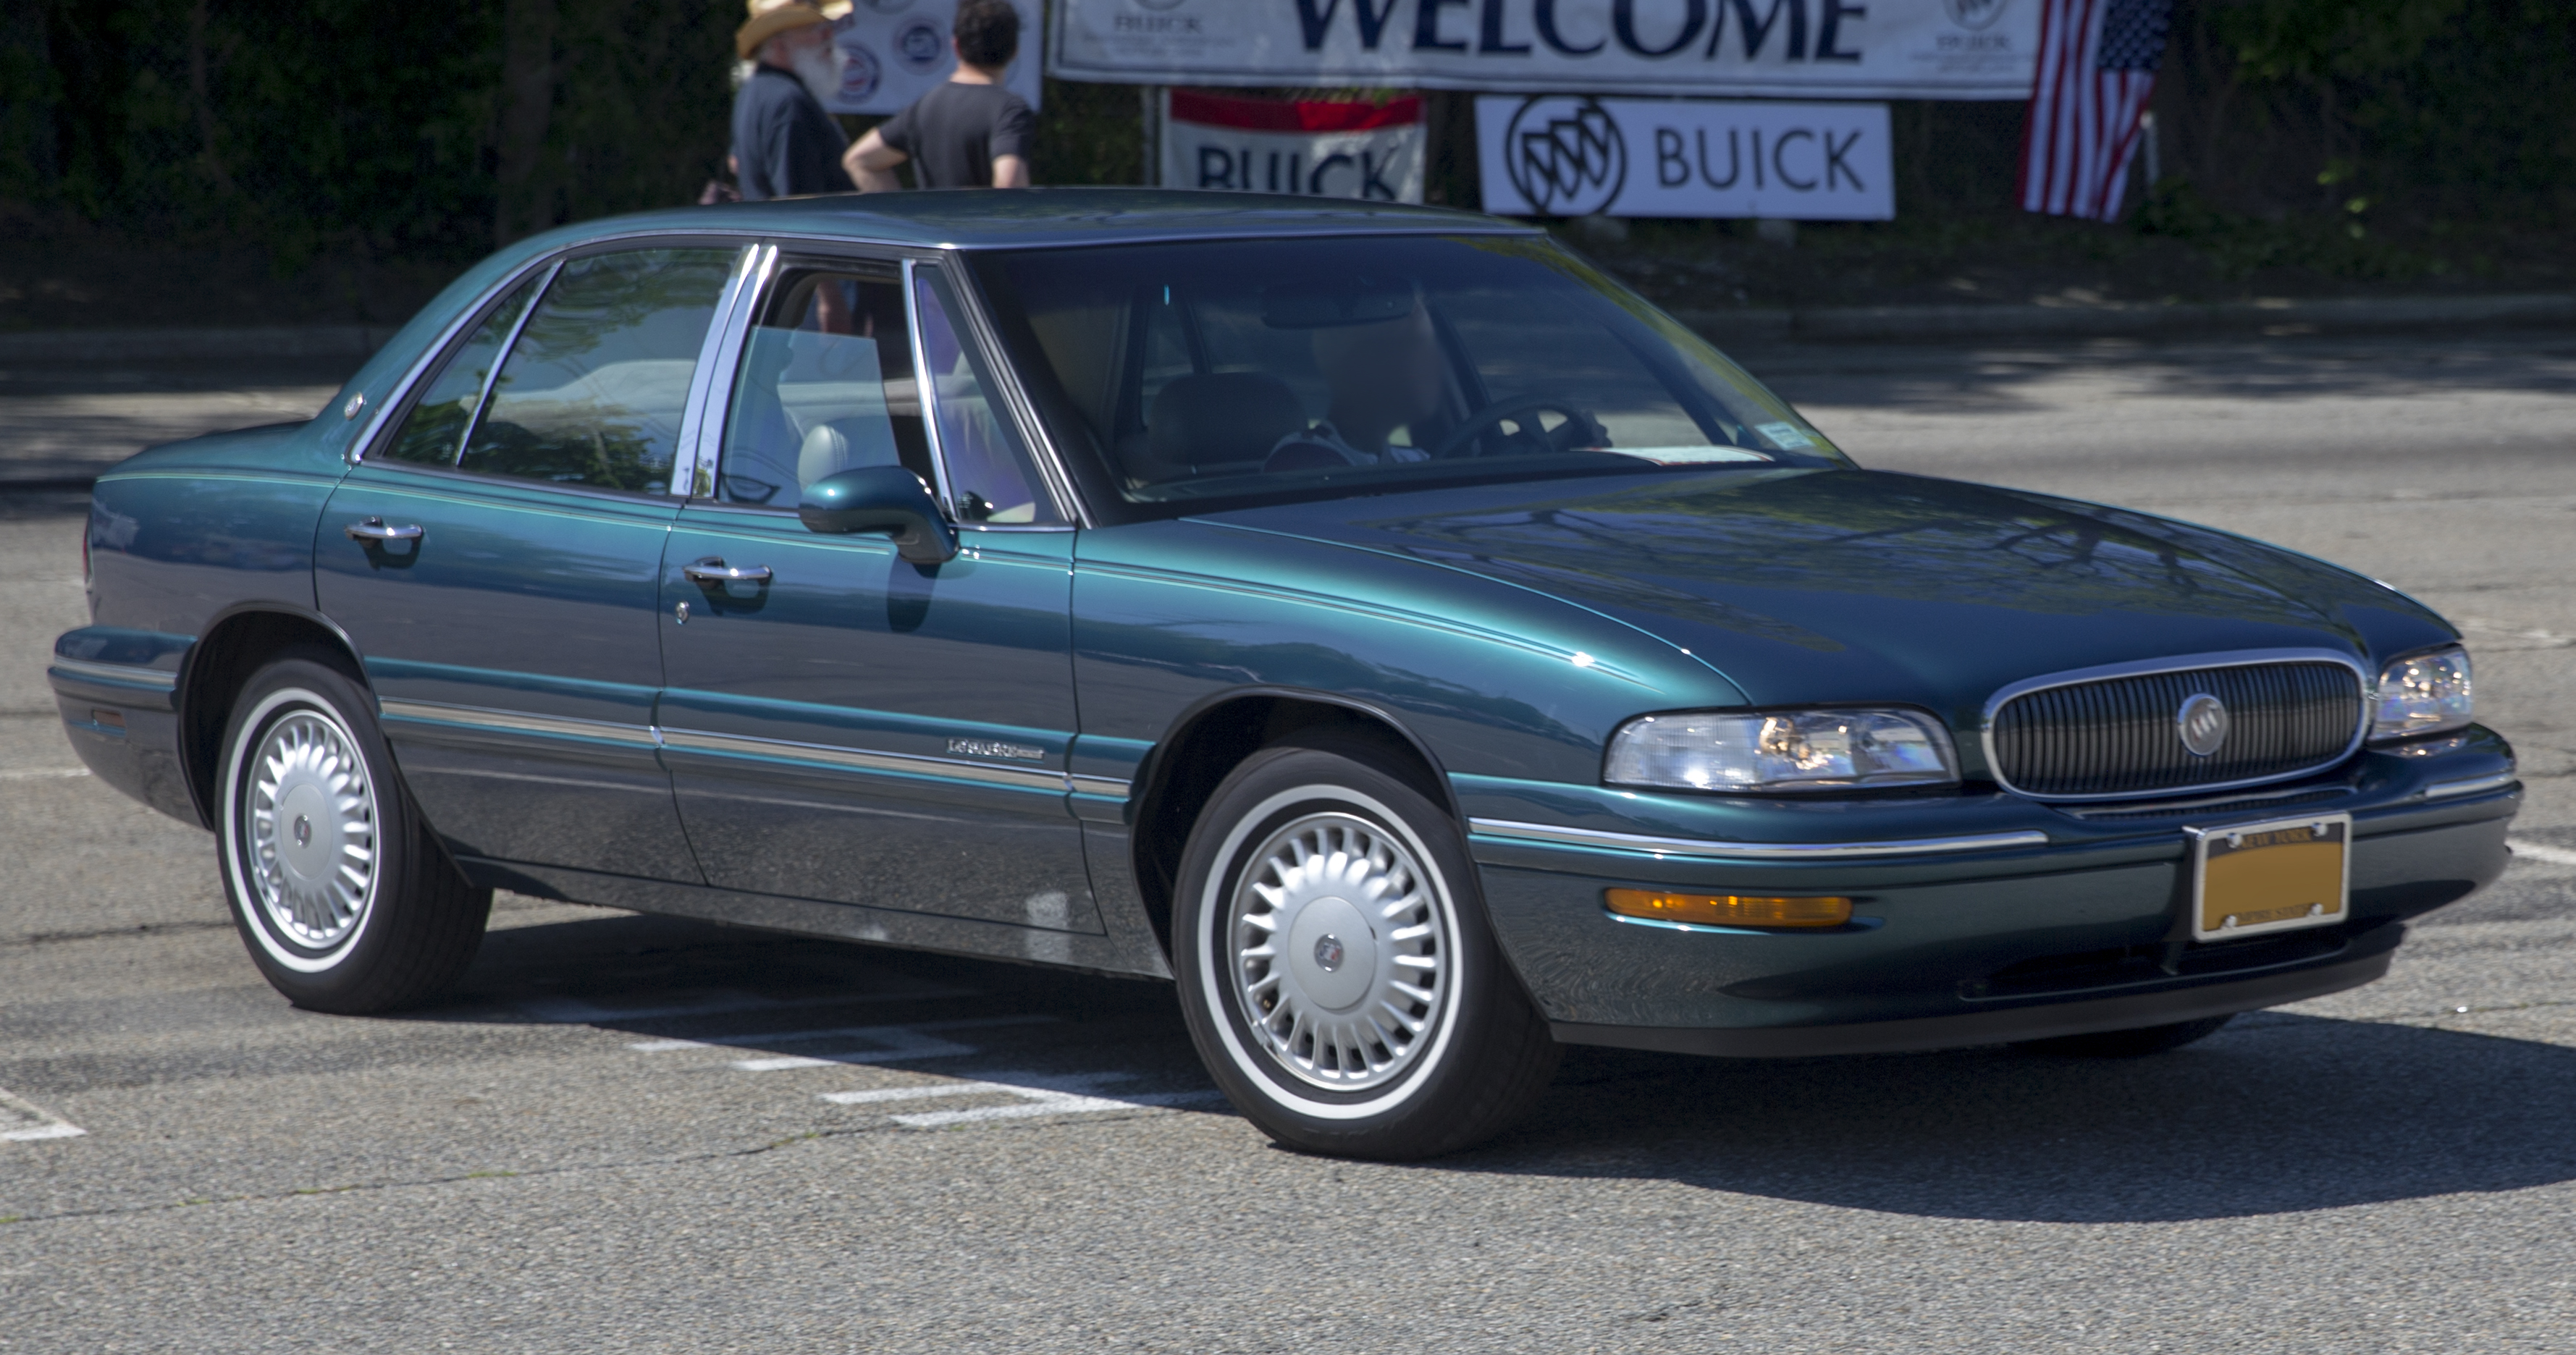 File:1998 Buick LeSabre Limited, Emerald Green, front right.jpg - Wikimedia  Commons